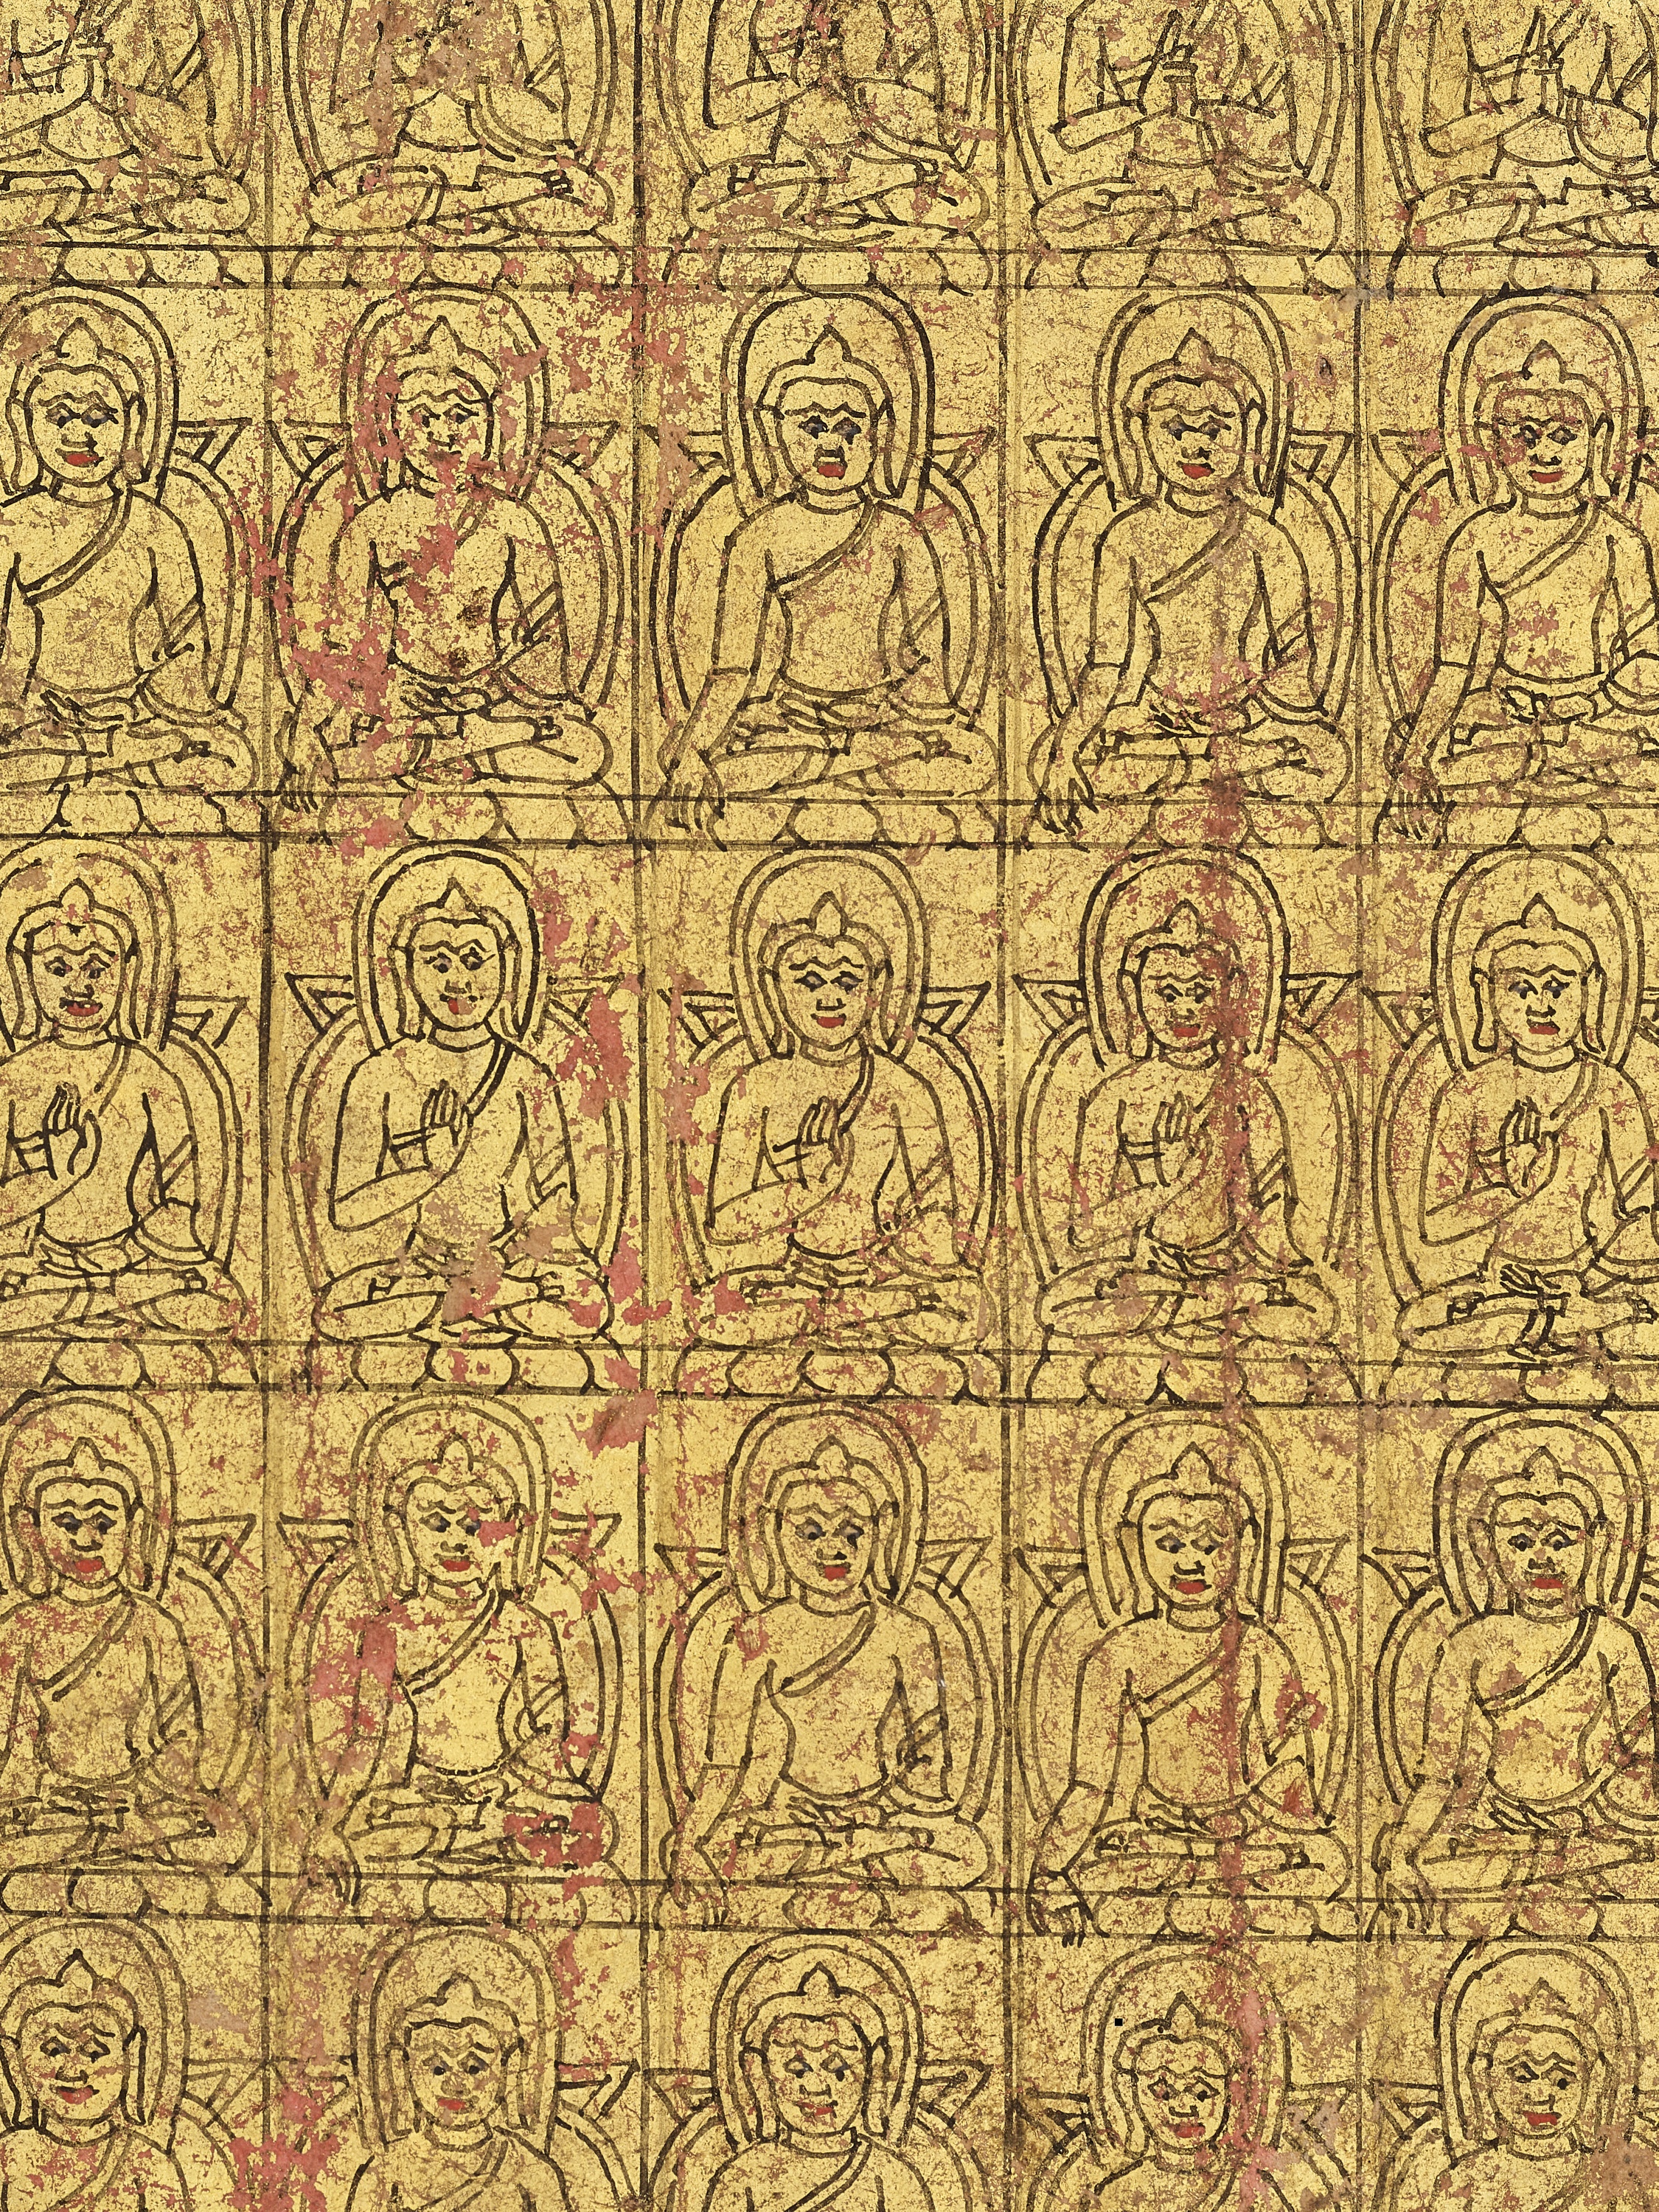 A PAINTED 'HUNDRED BUDDHAS' MANUSCRIPT FRONT PAGE - Image 6 of 8